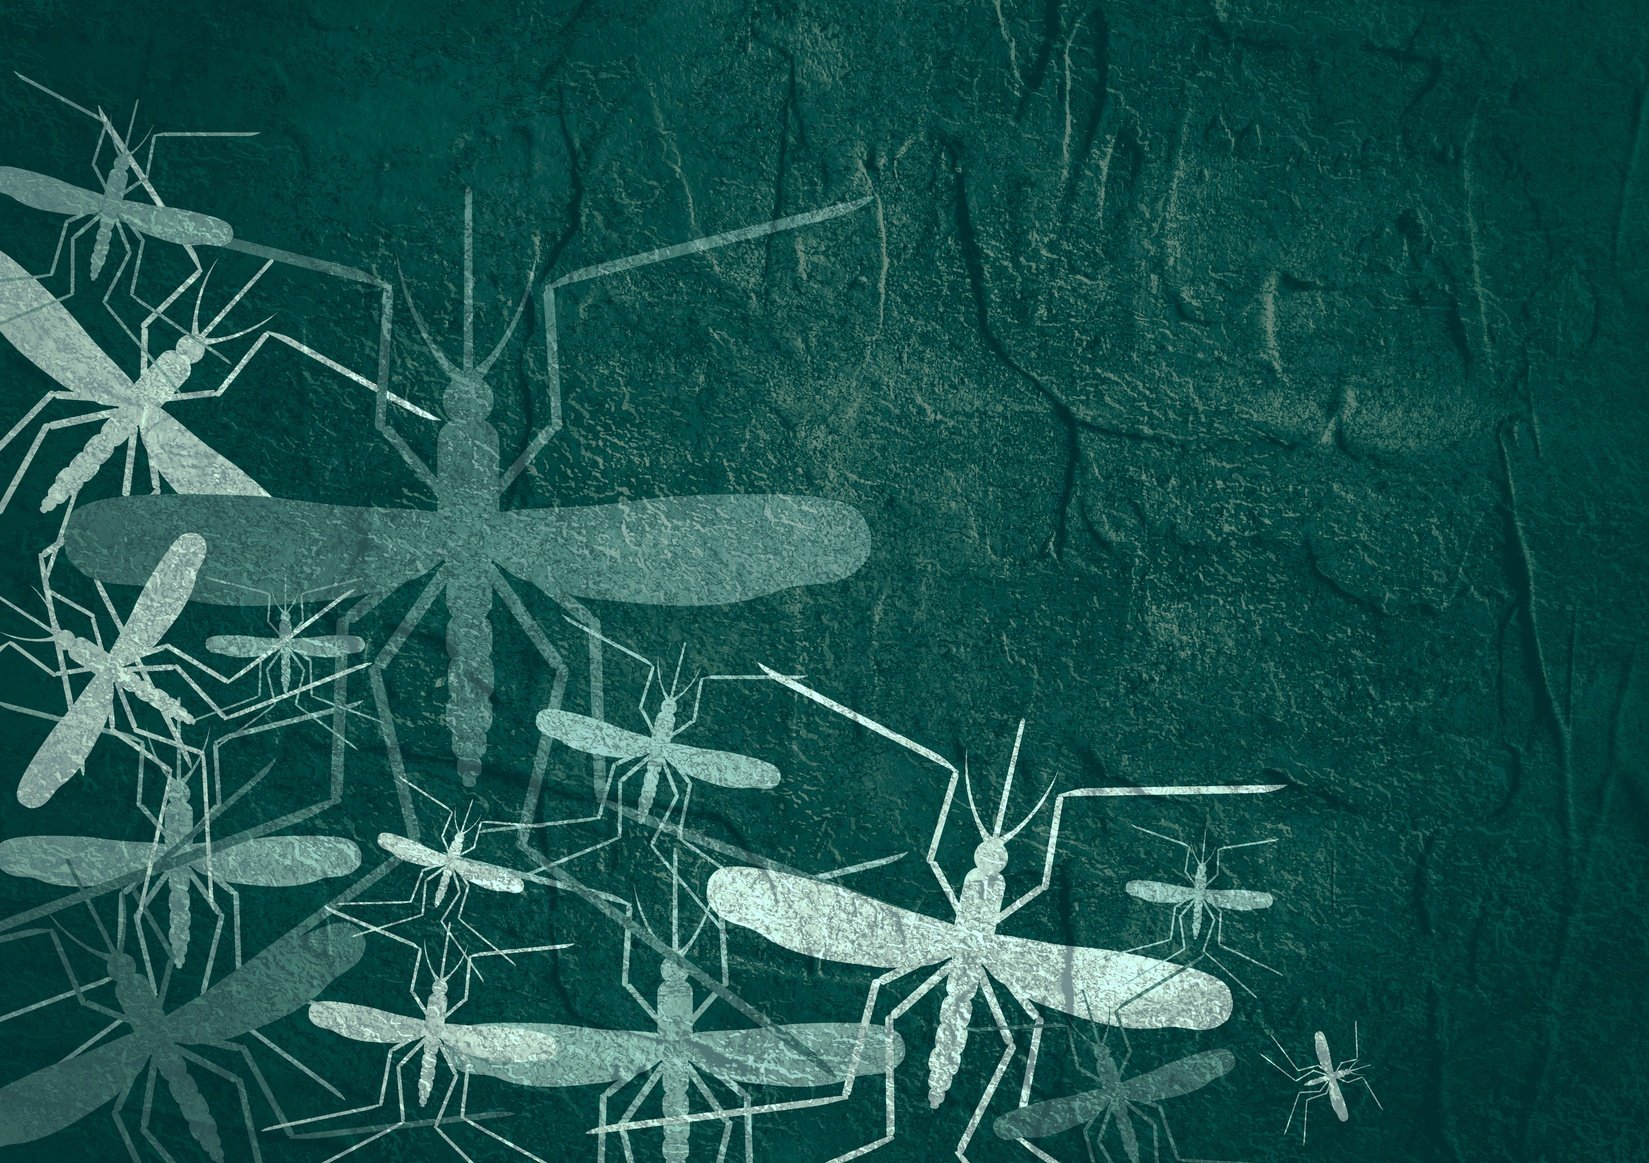 20 Random Mosquito Facts You Probably Didn't Know - Featured Image